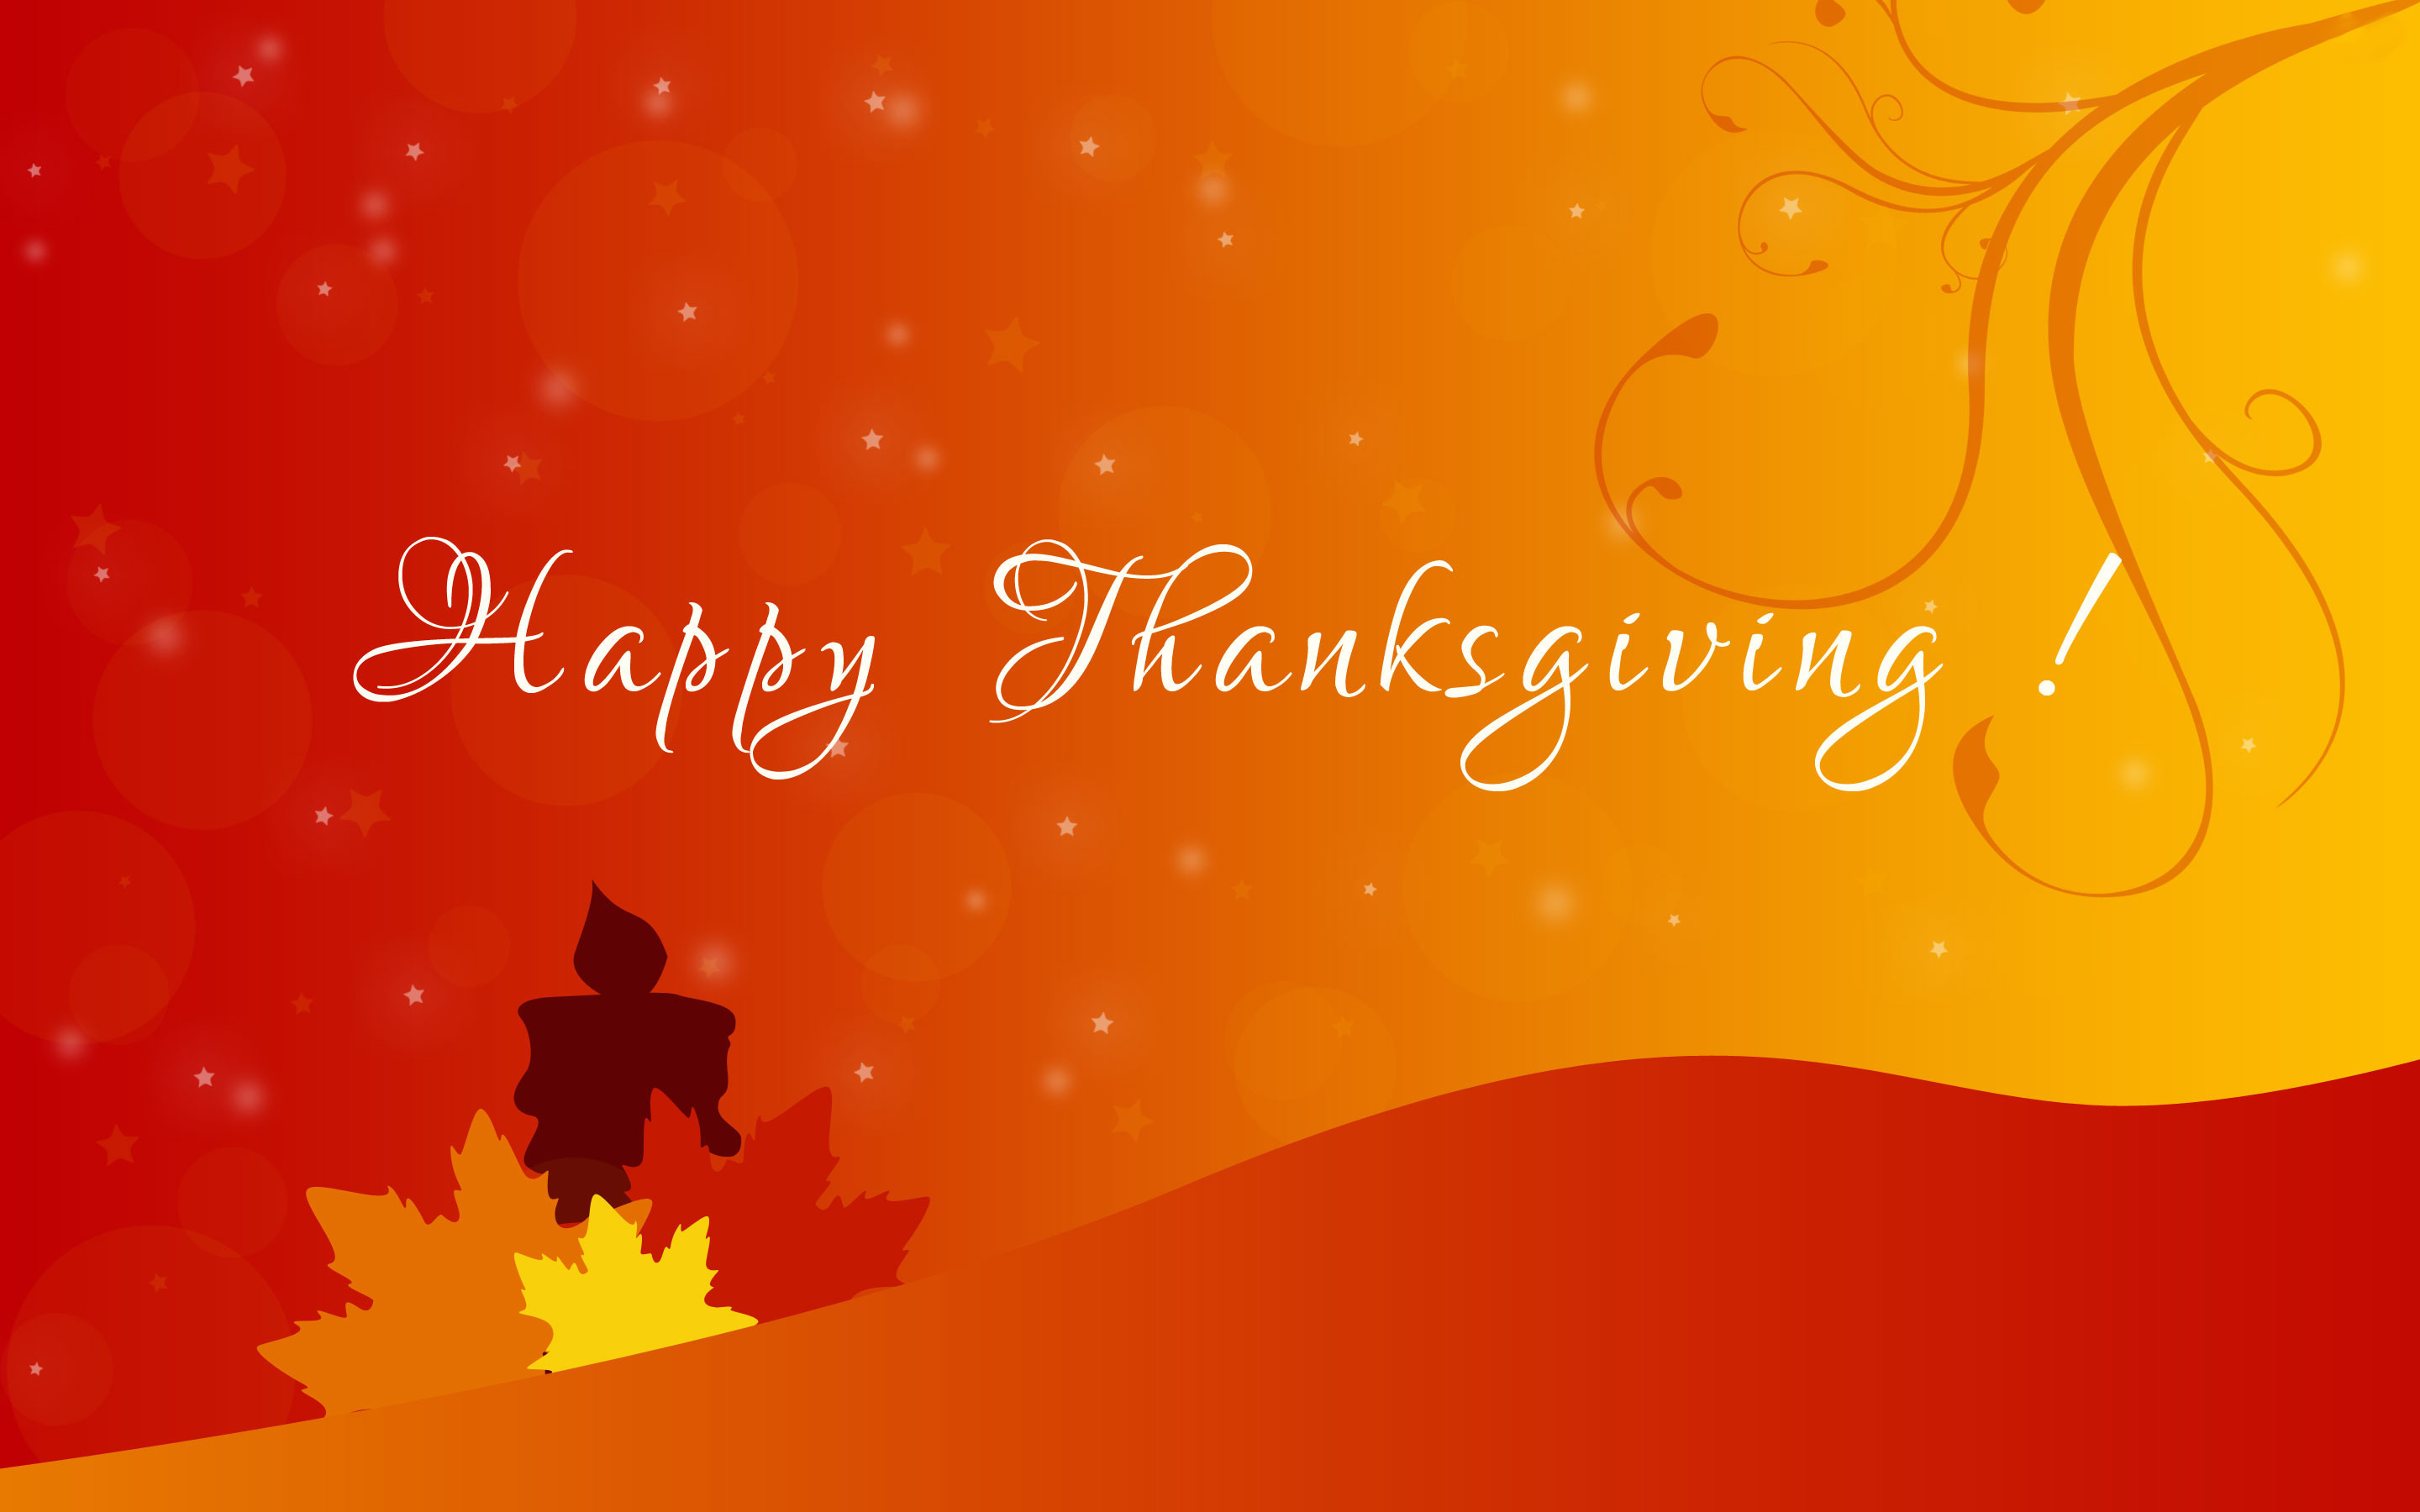 Free Thanksgiving Wallpapers HD